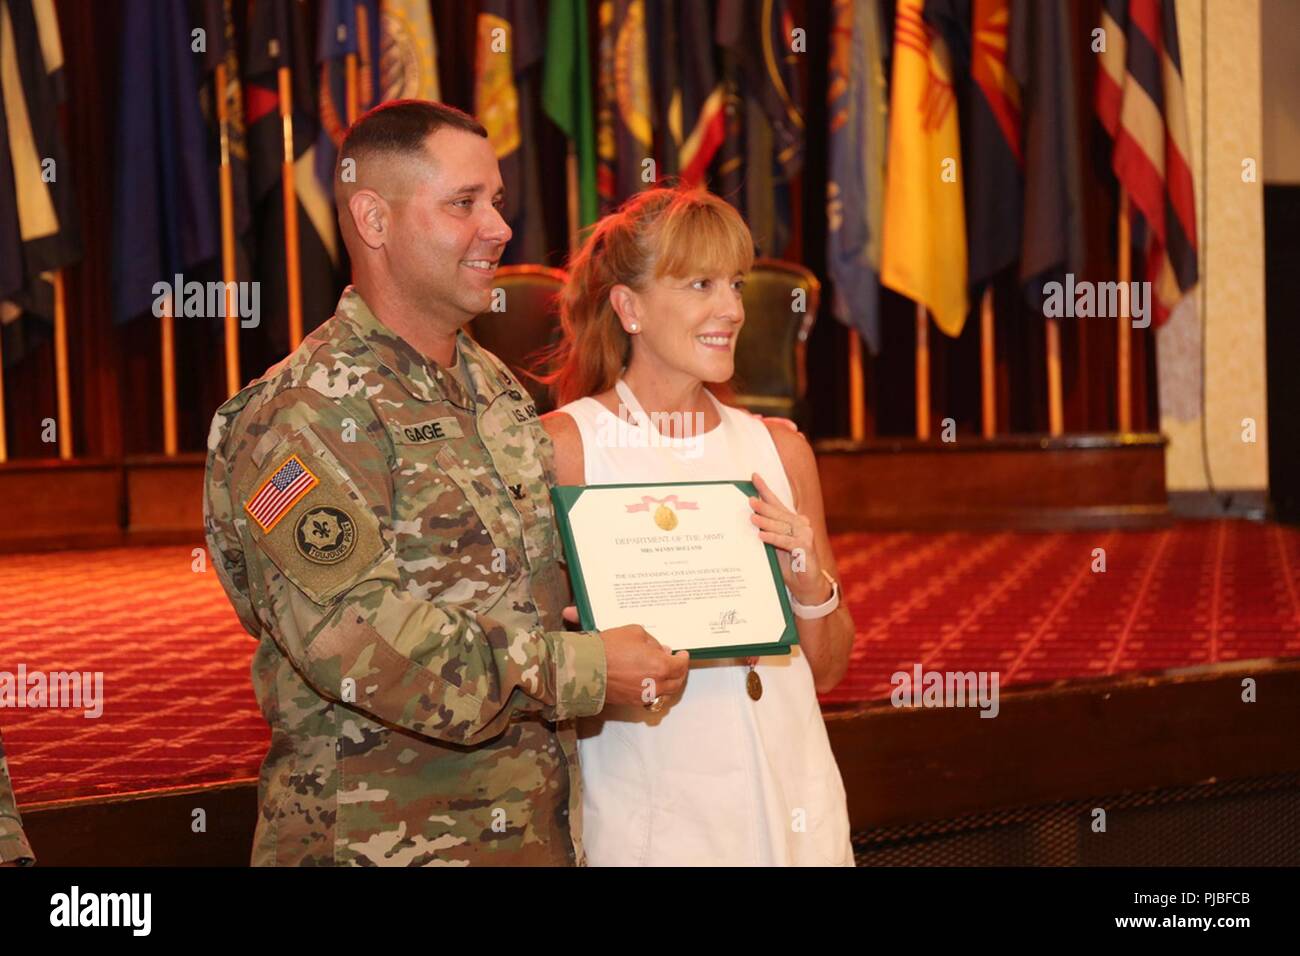 Col. Phillip Gage, USAG Japan commander, presents Wendy Holland with an Outstanding Civilian Service Award for her dedication and volunteerism in the community during an informal ceremony before her husband's relinquishment of responsibility ceremony July 11, 2018, at Camp Zama Community Club.  Her husband, outgoing Command Sgt. Maj. Will Holland, told ceremony attendees that Zama was the best duty station he had served at in his 32-year-career. Stock Photo